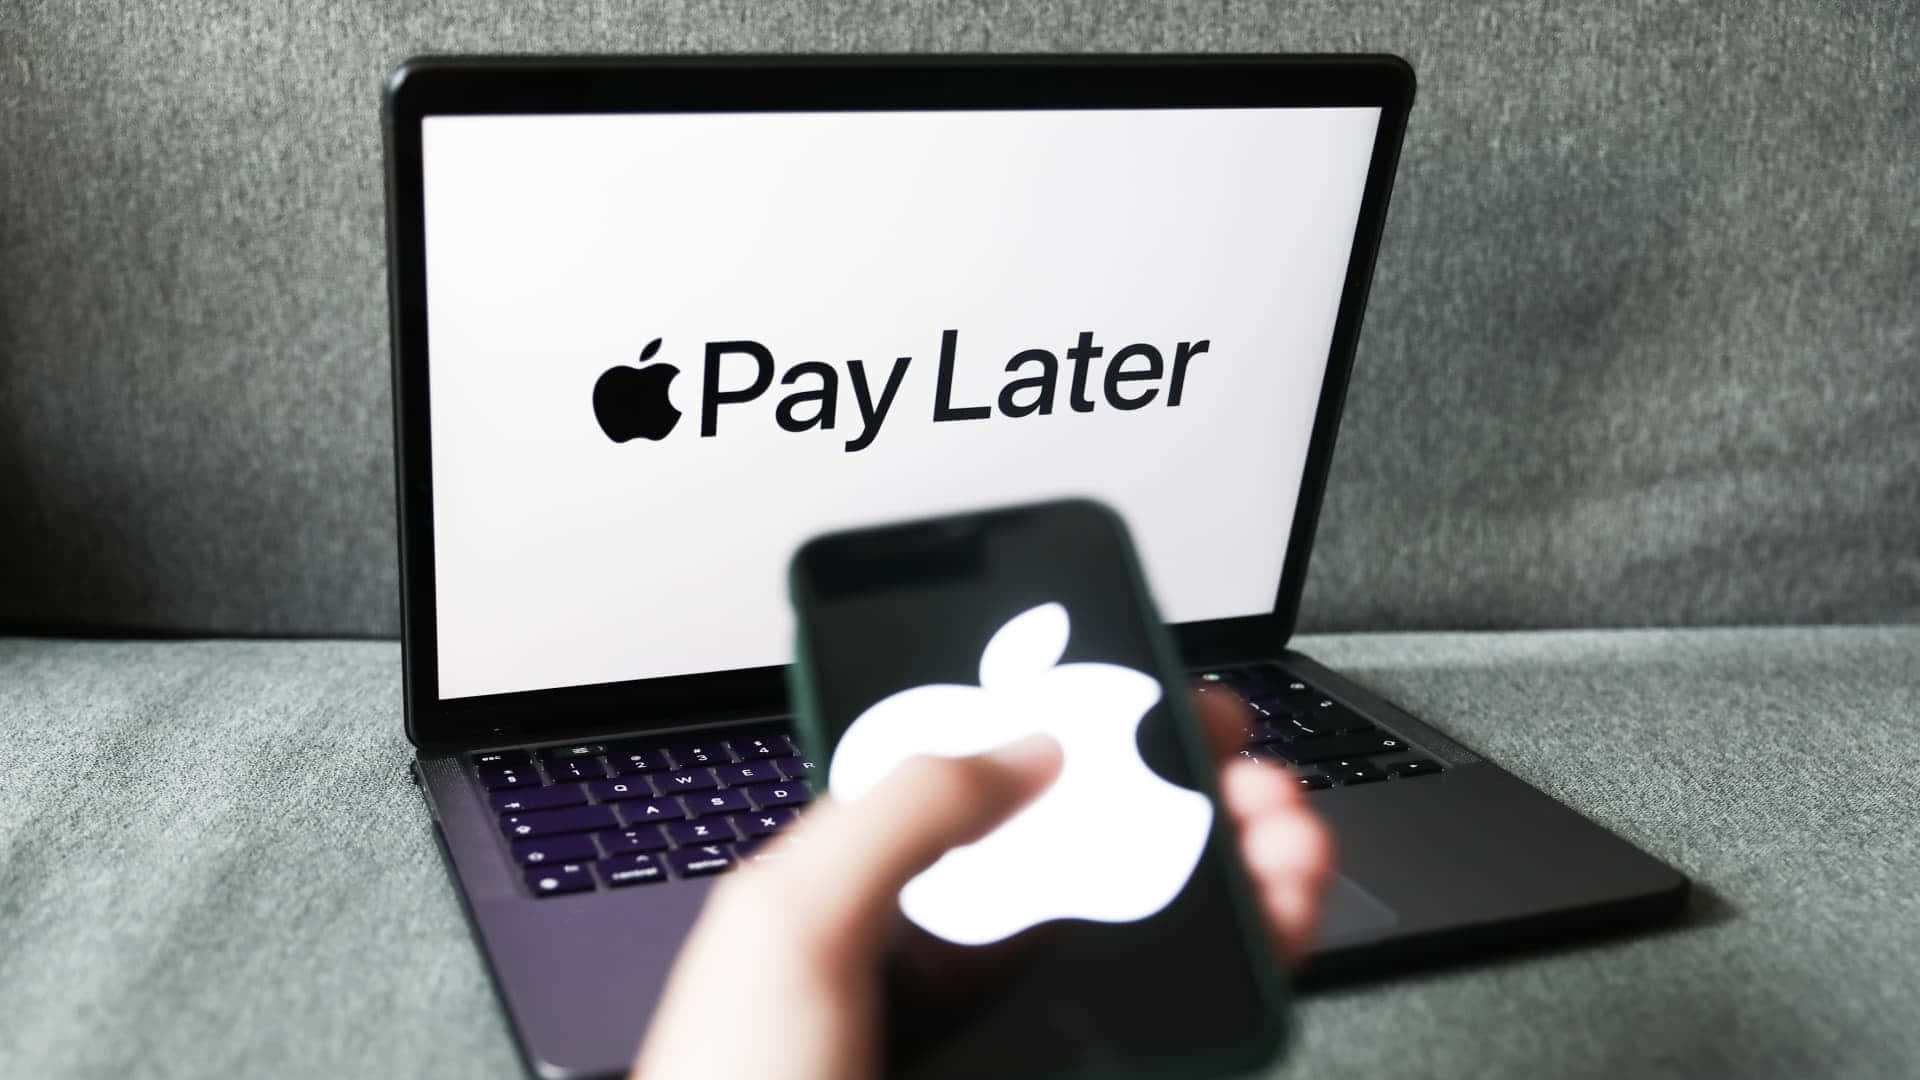 Apple Pay Later - A Person Holding An Apple Laptop